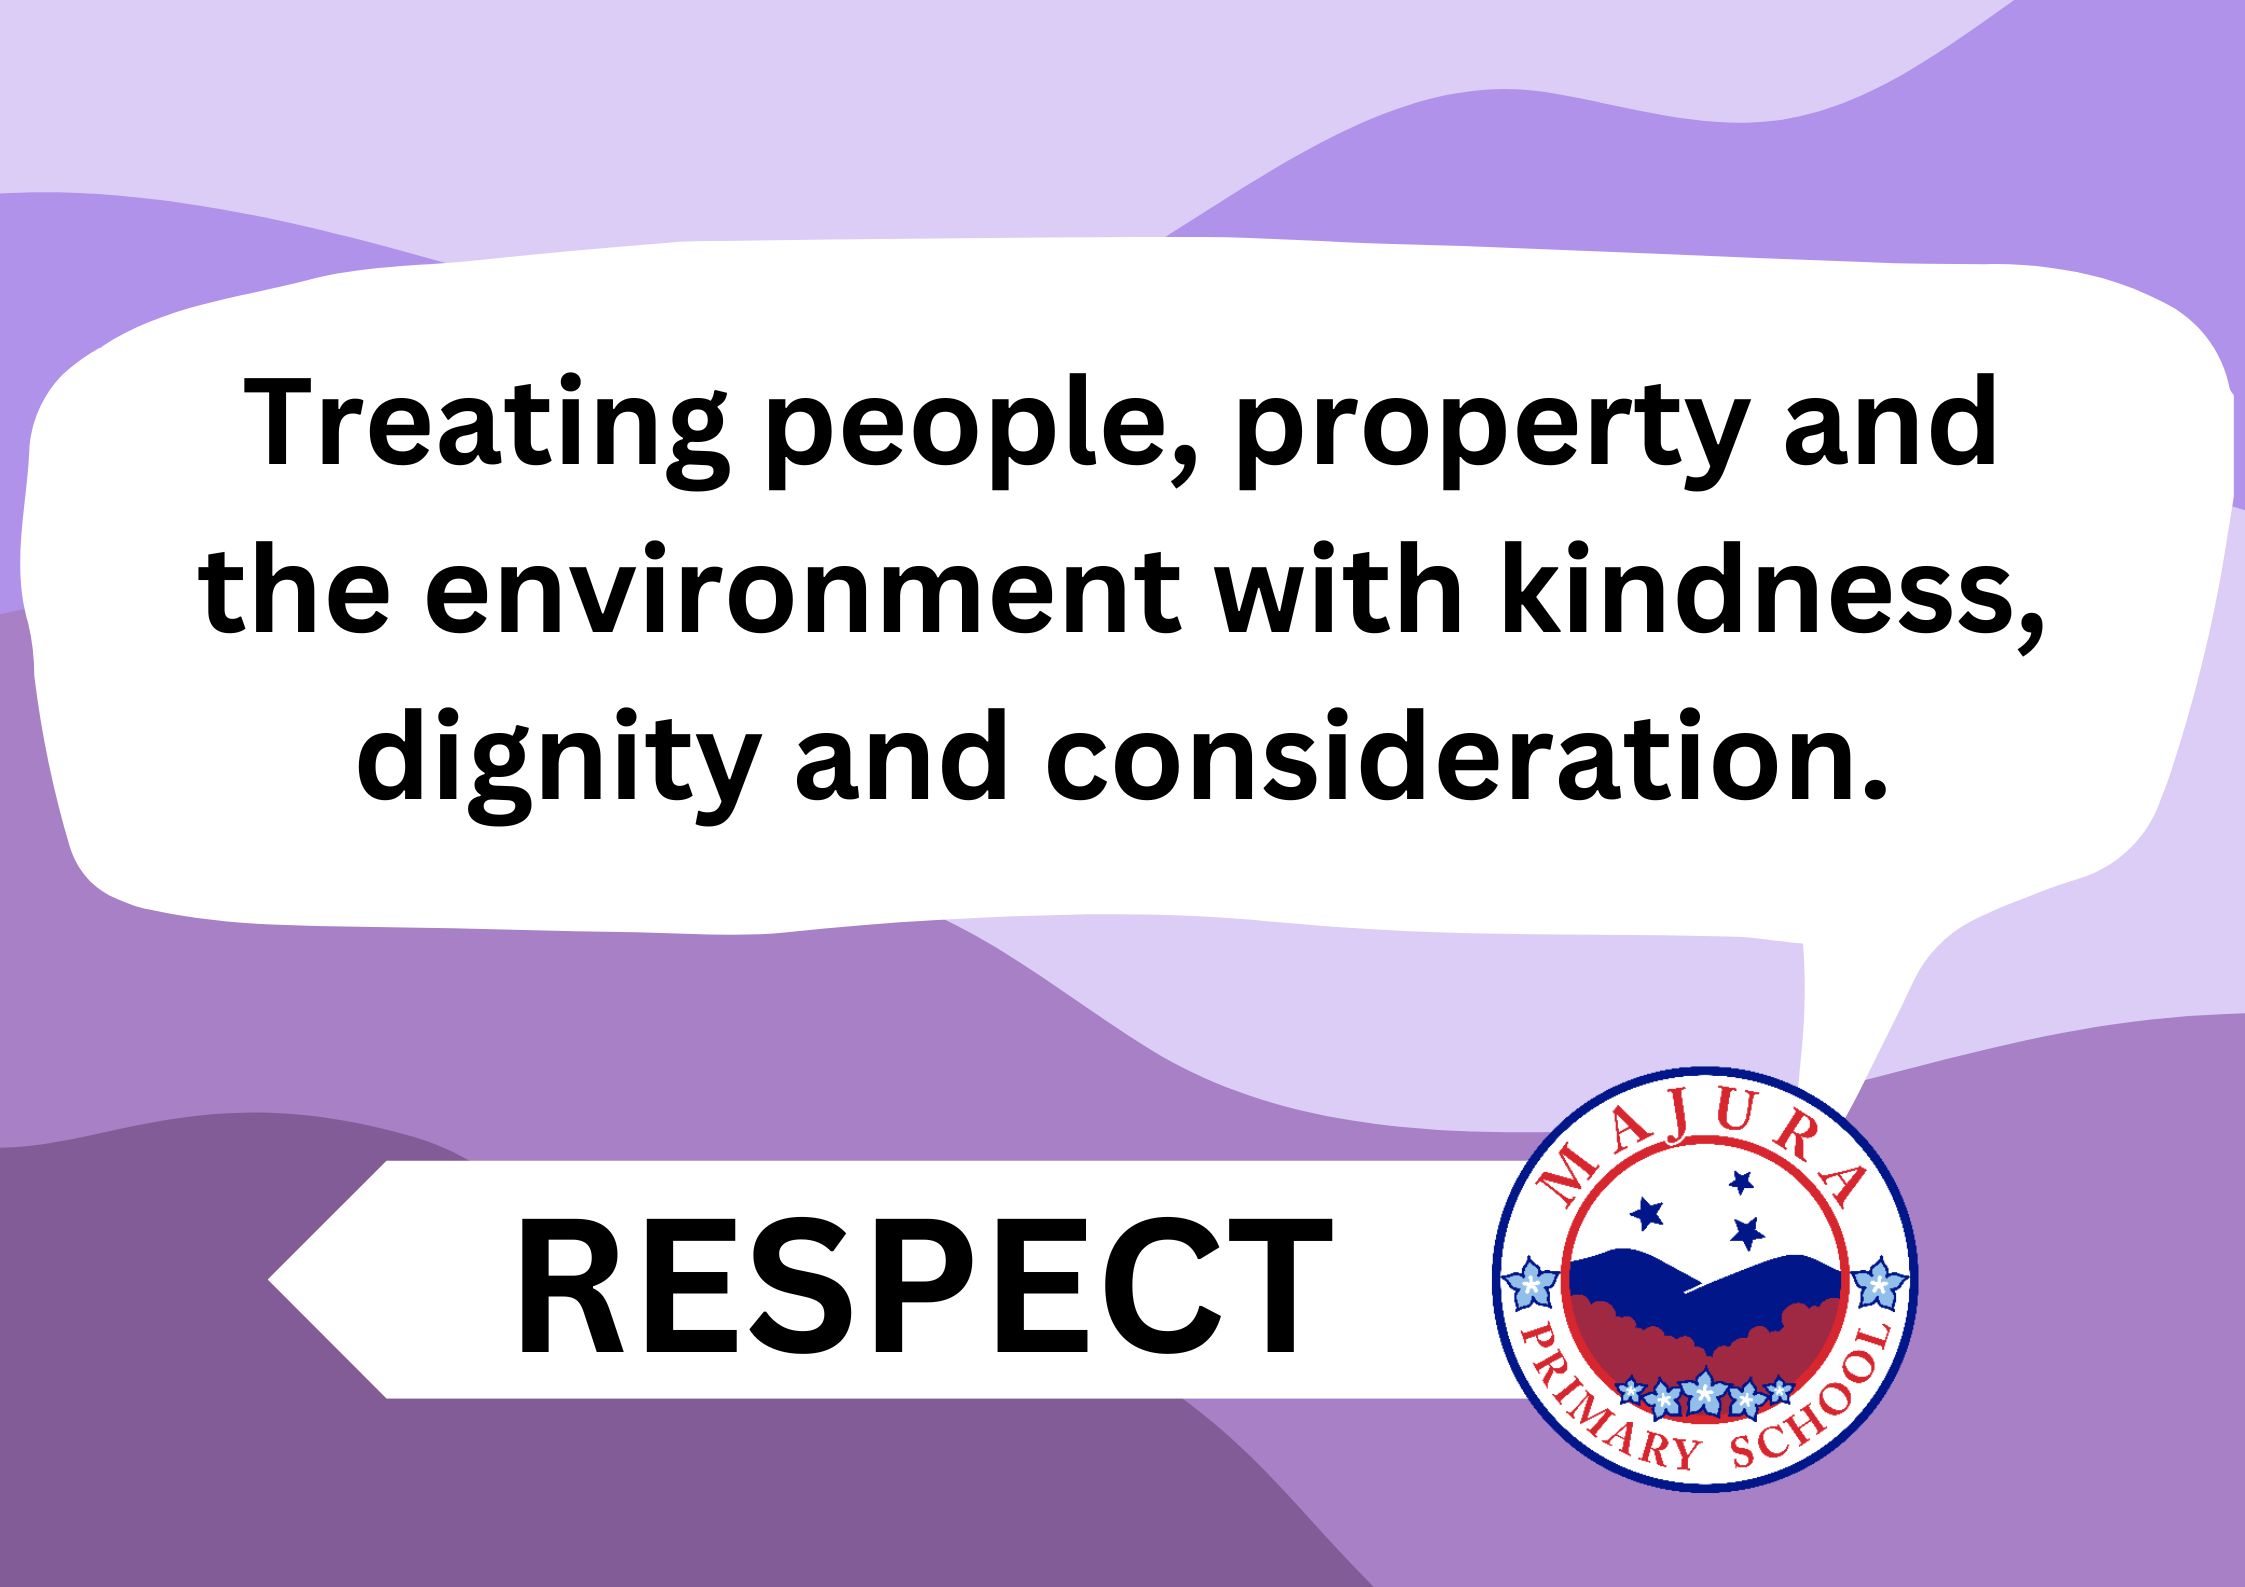 Next to the Majura Primary logo is the word 'Respect'. Above this is a speech bubble that reads 'Treating people, property and the environment with kindness, dignity and consideration'.